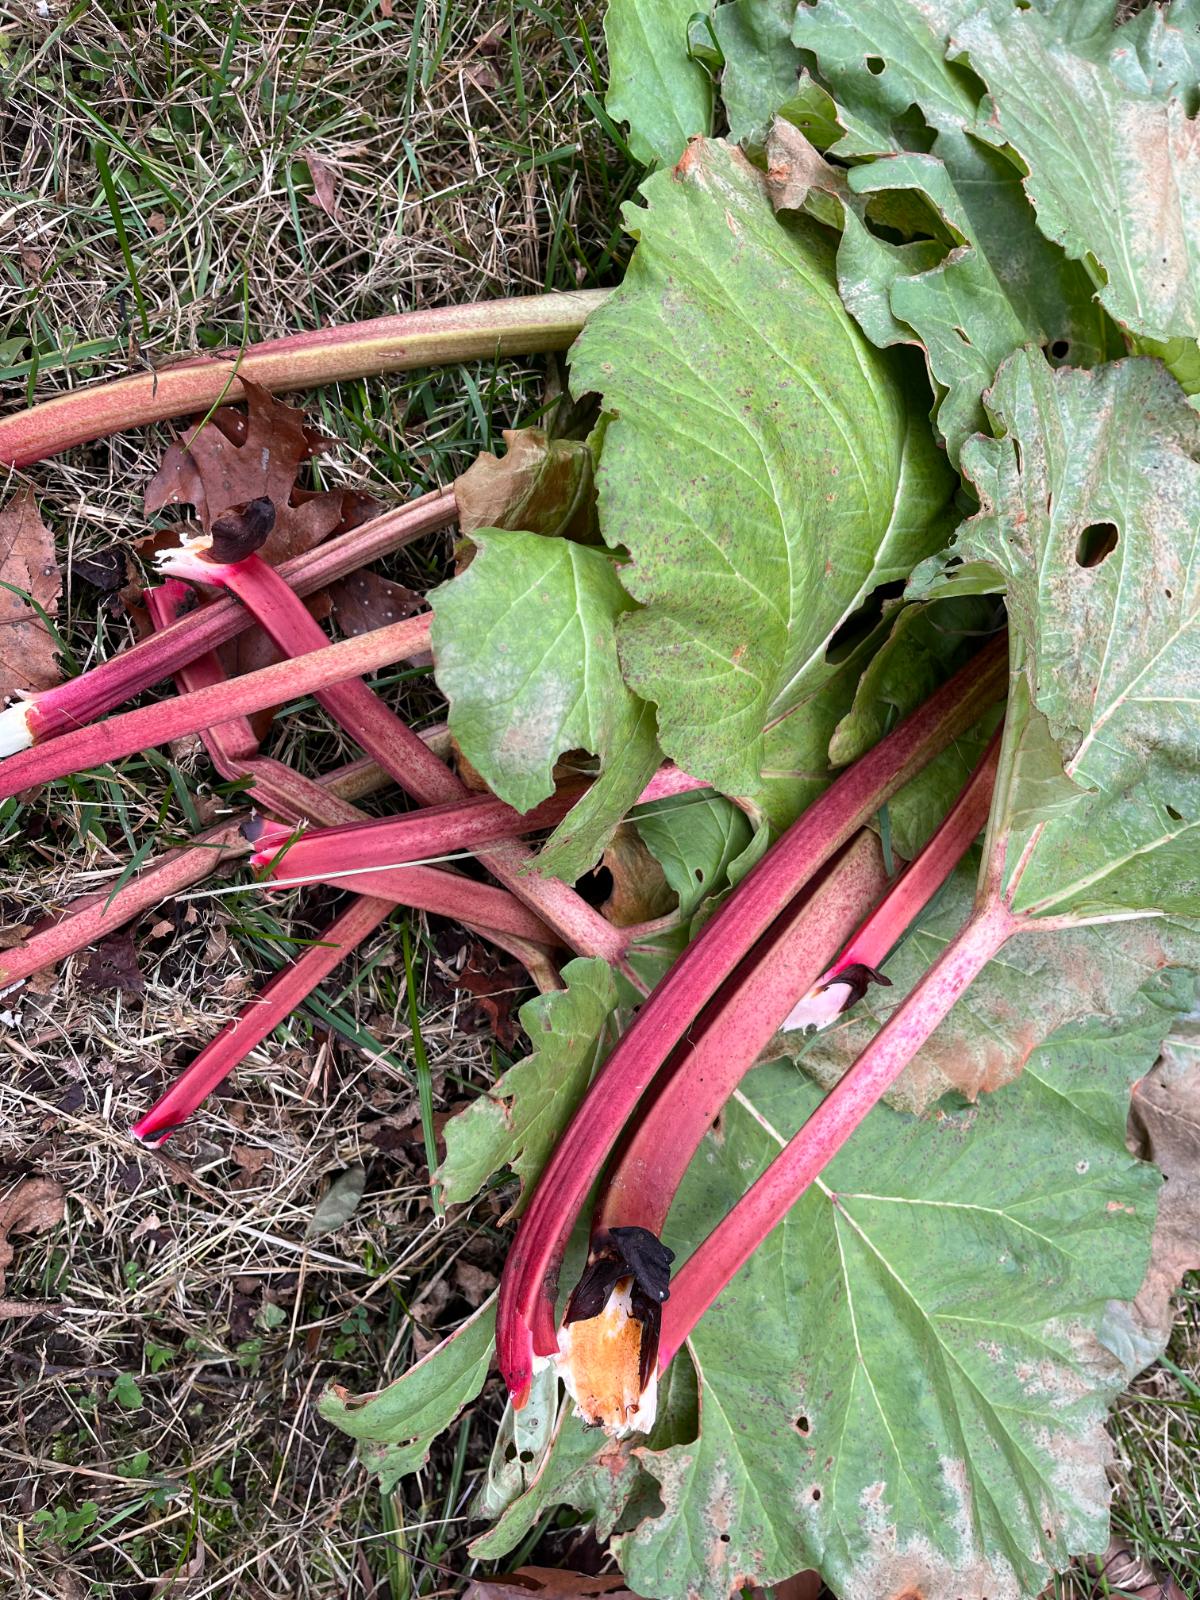 Stalks of rhubarb pulled from the plant